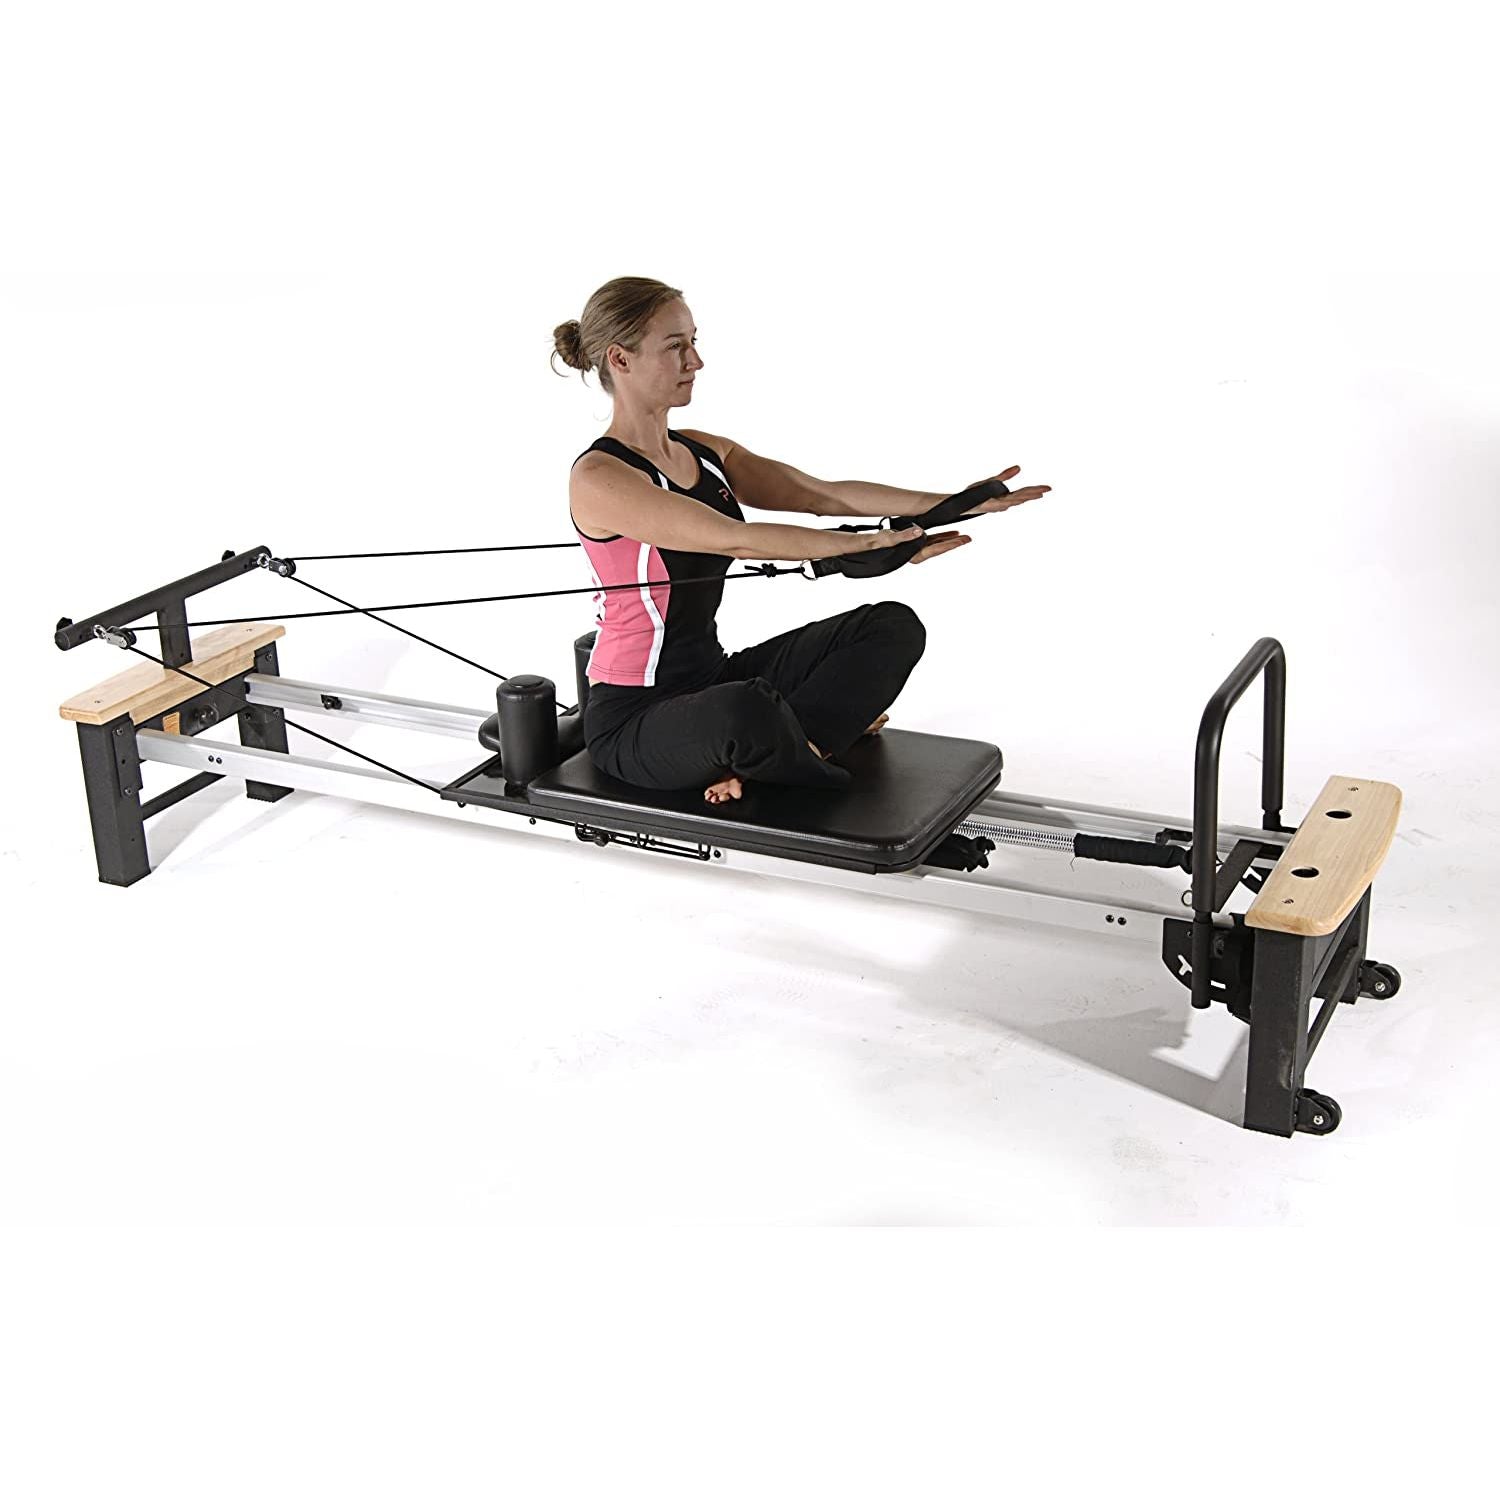 Get a head start on your New Year's fitness goals with this discounted  Pilates machine